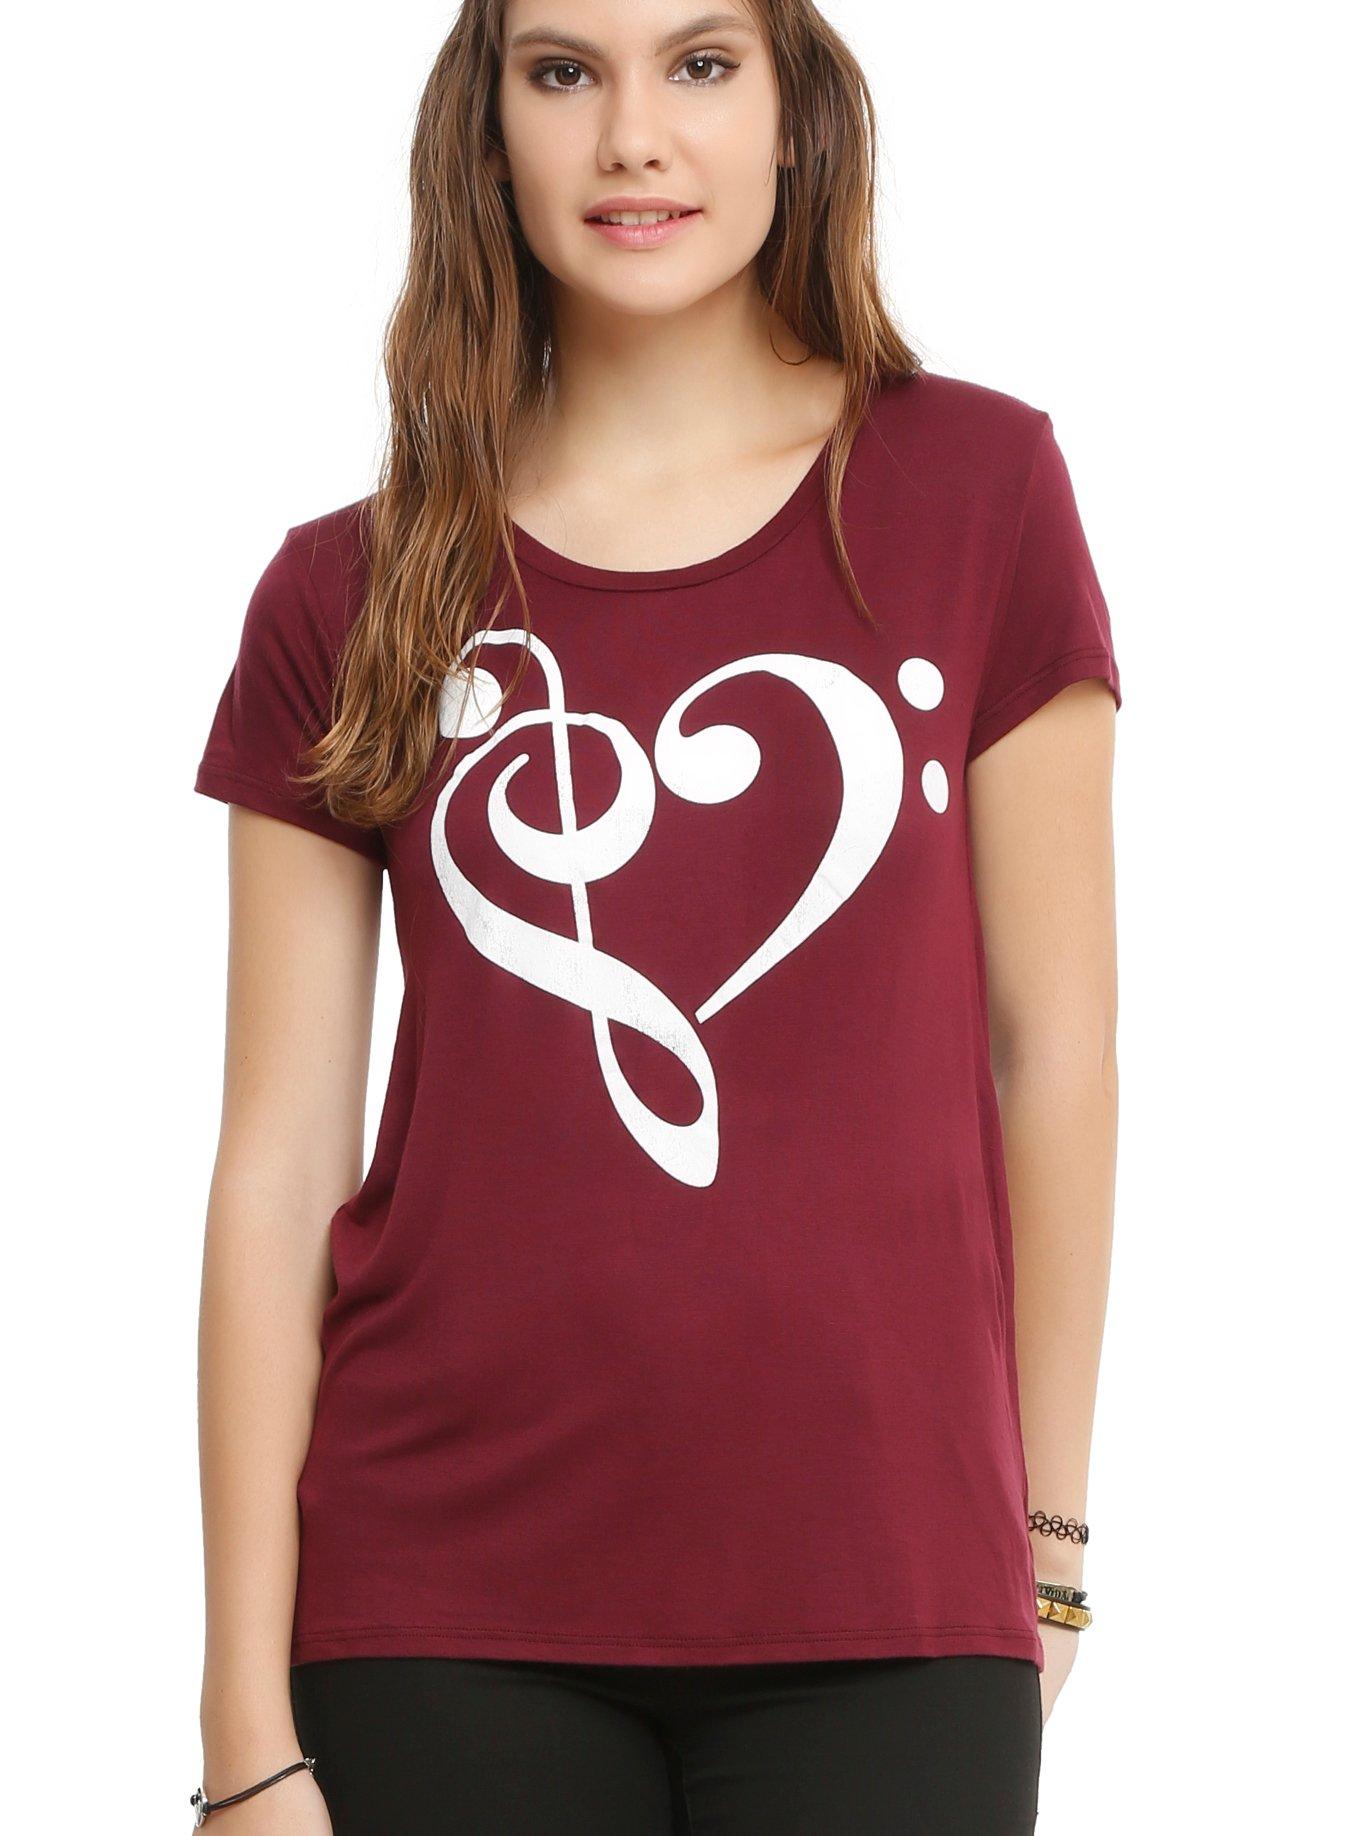 Music Clef Heart Girls T-Shirt, RED, hi-res